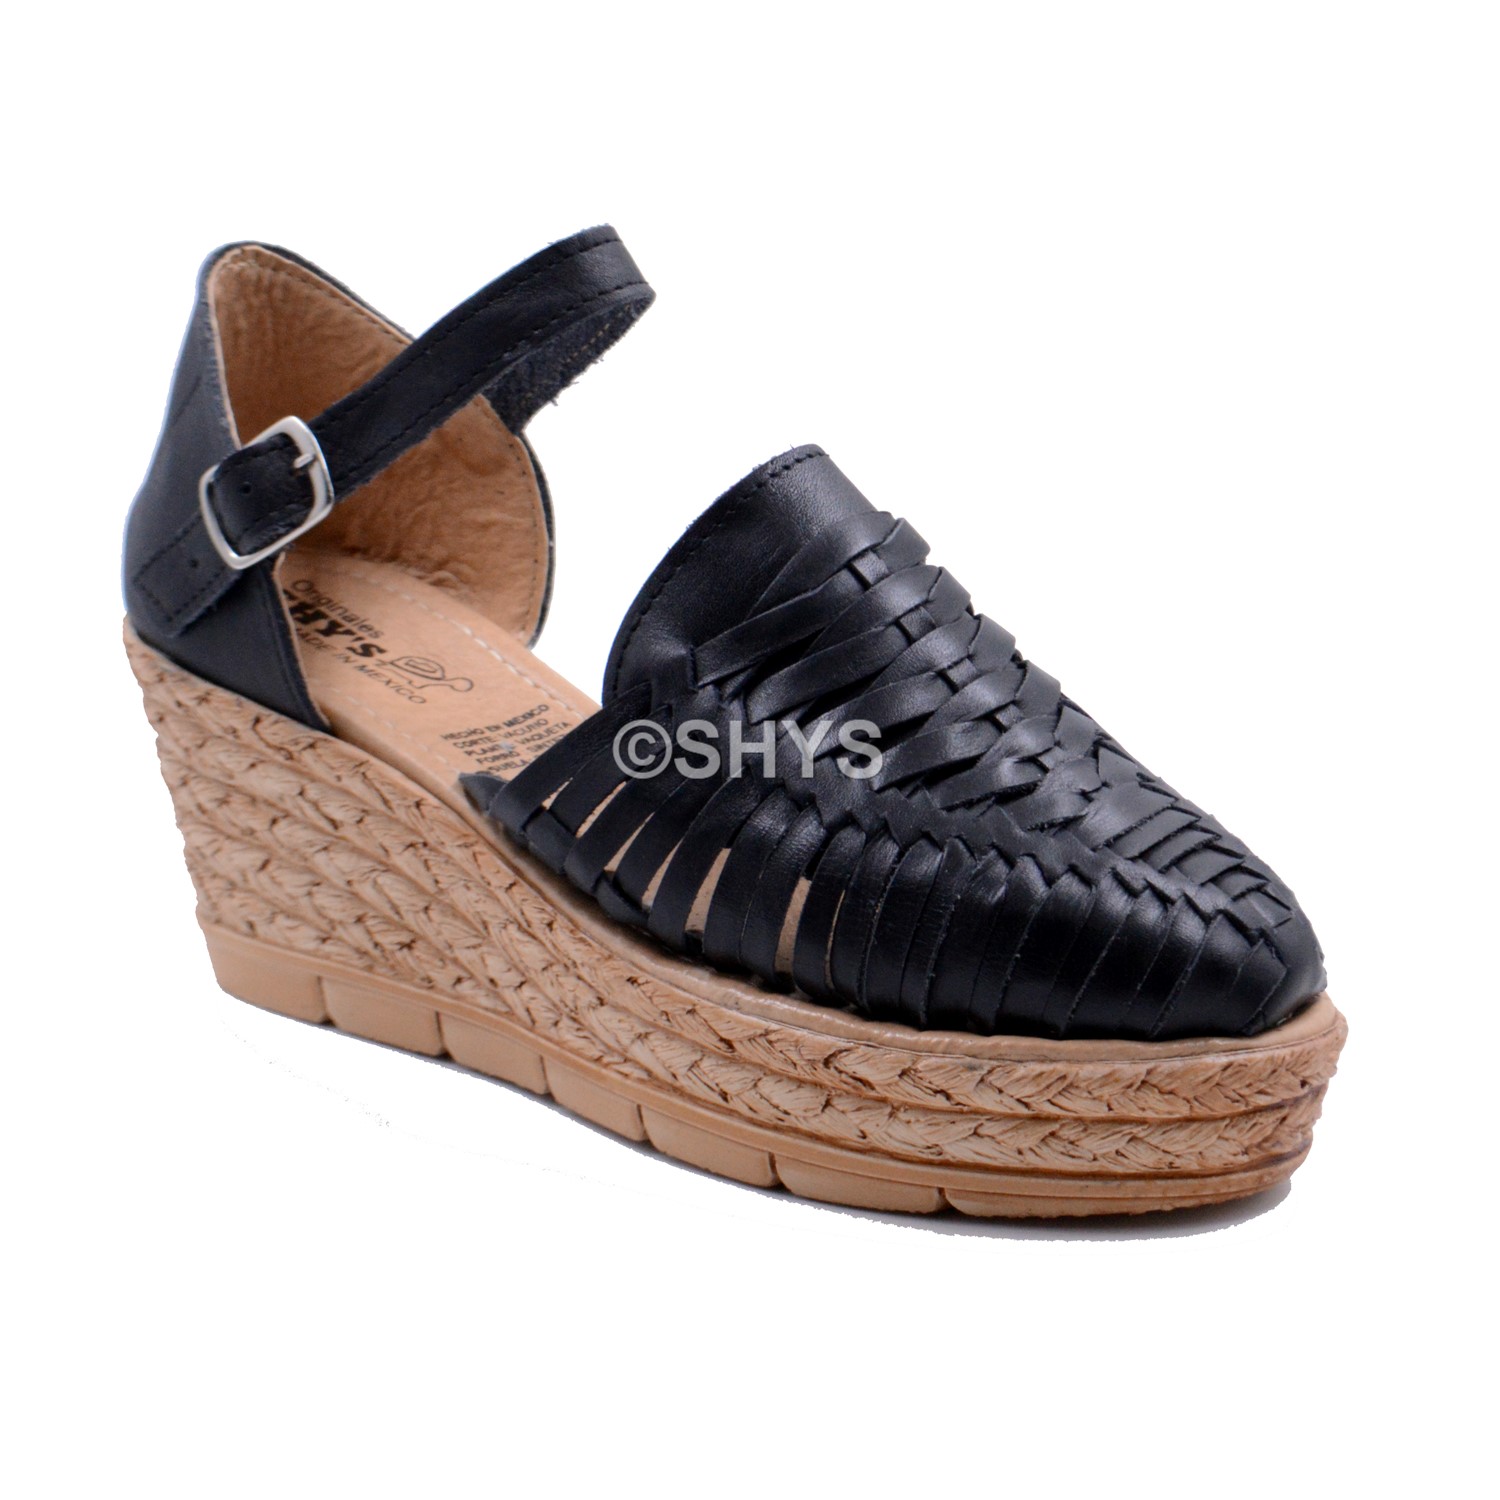 Leather Mexican Wedge Sandals For Woman Huaraches Negro Dps-161-2